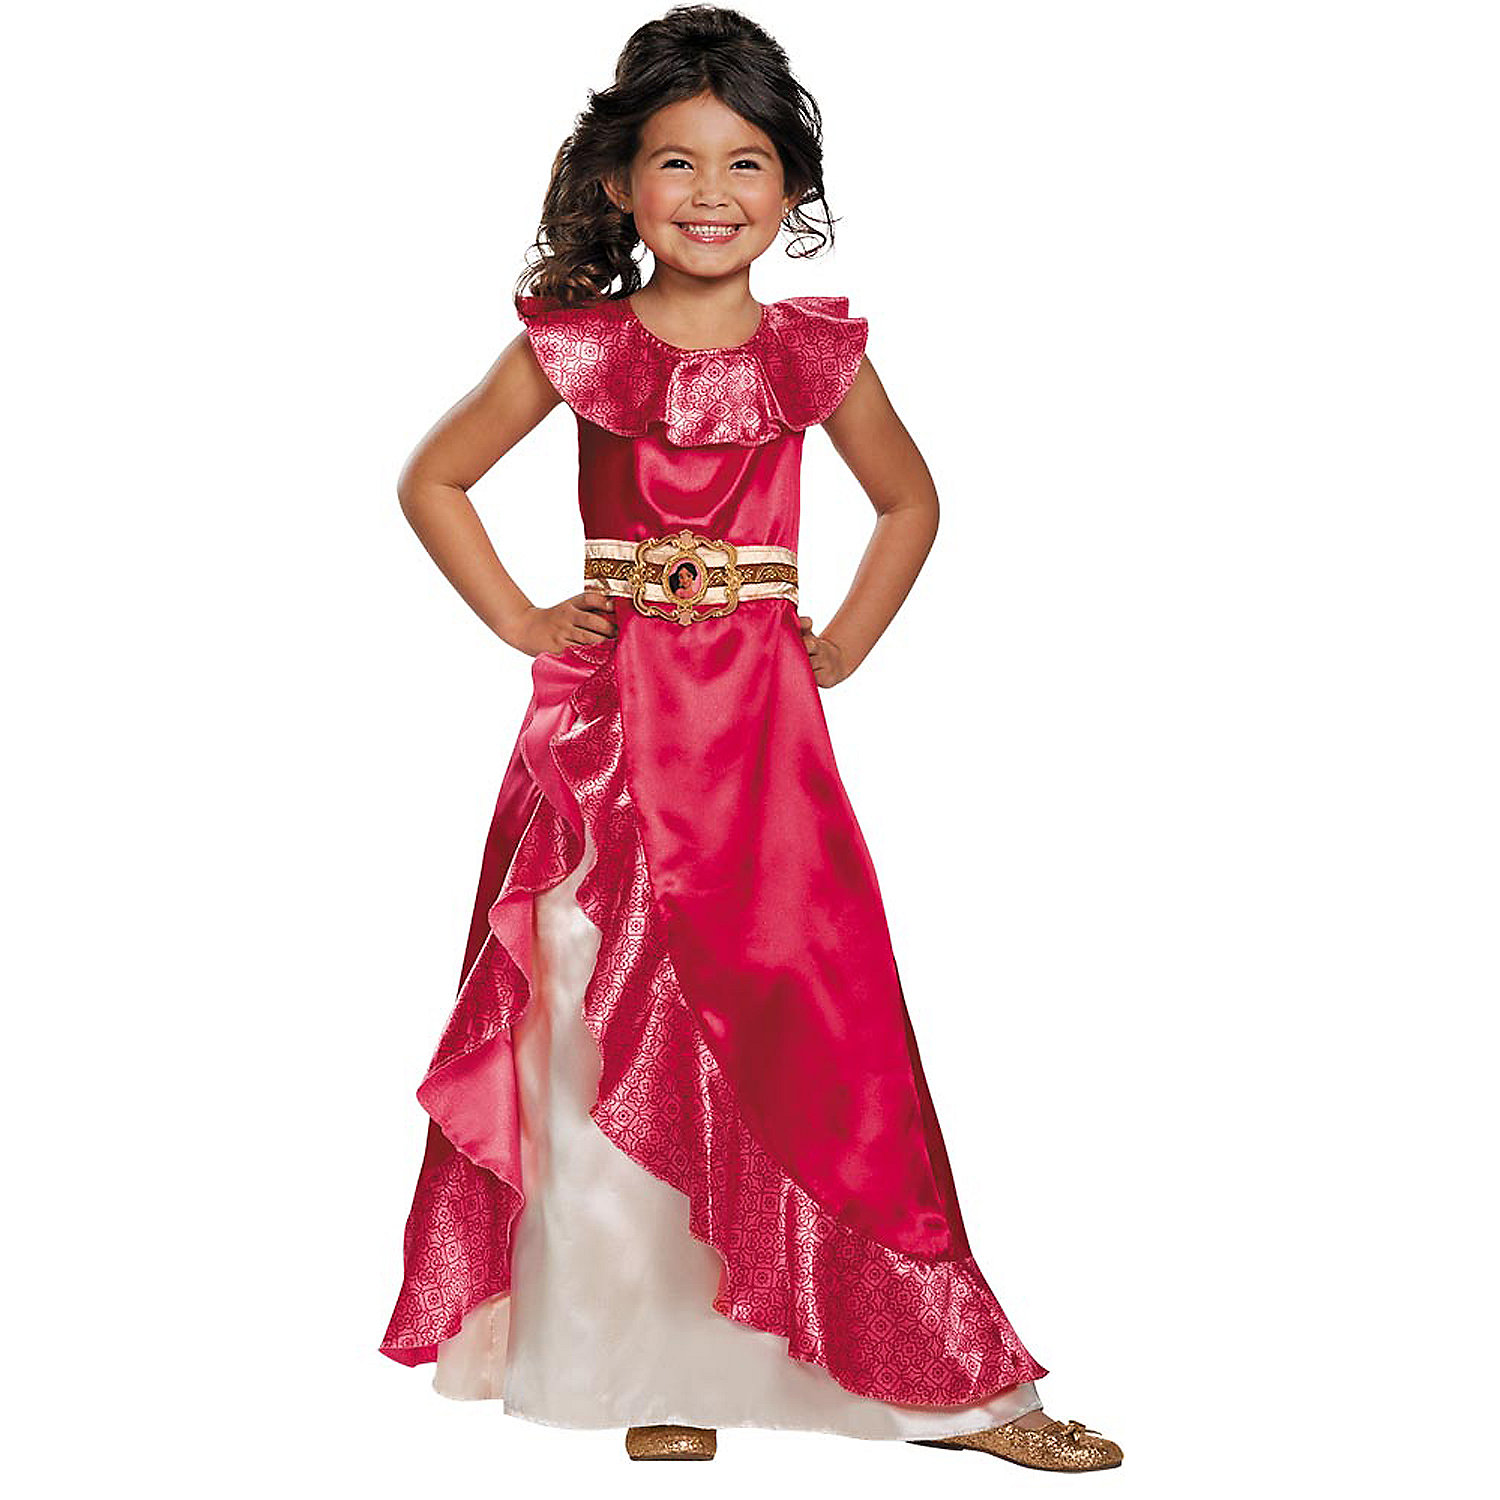 Disguise Toddler Girls' Disney Elena of Avalor Dress Costume - Size 3T-4T - image 1 of 2